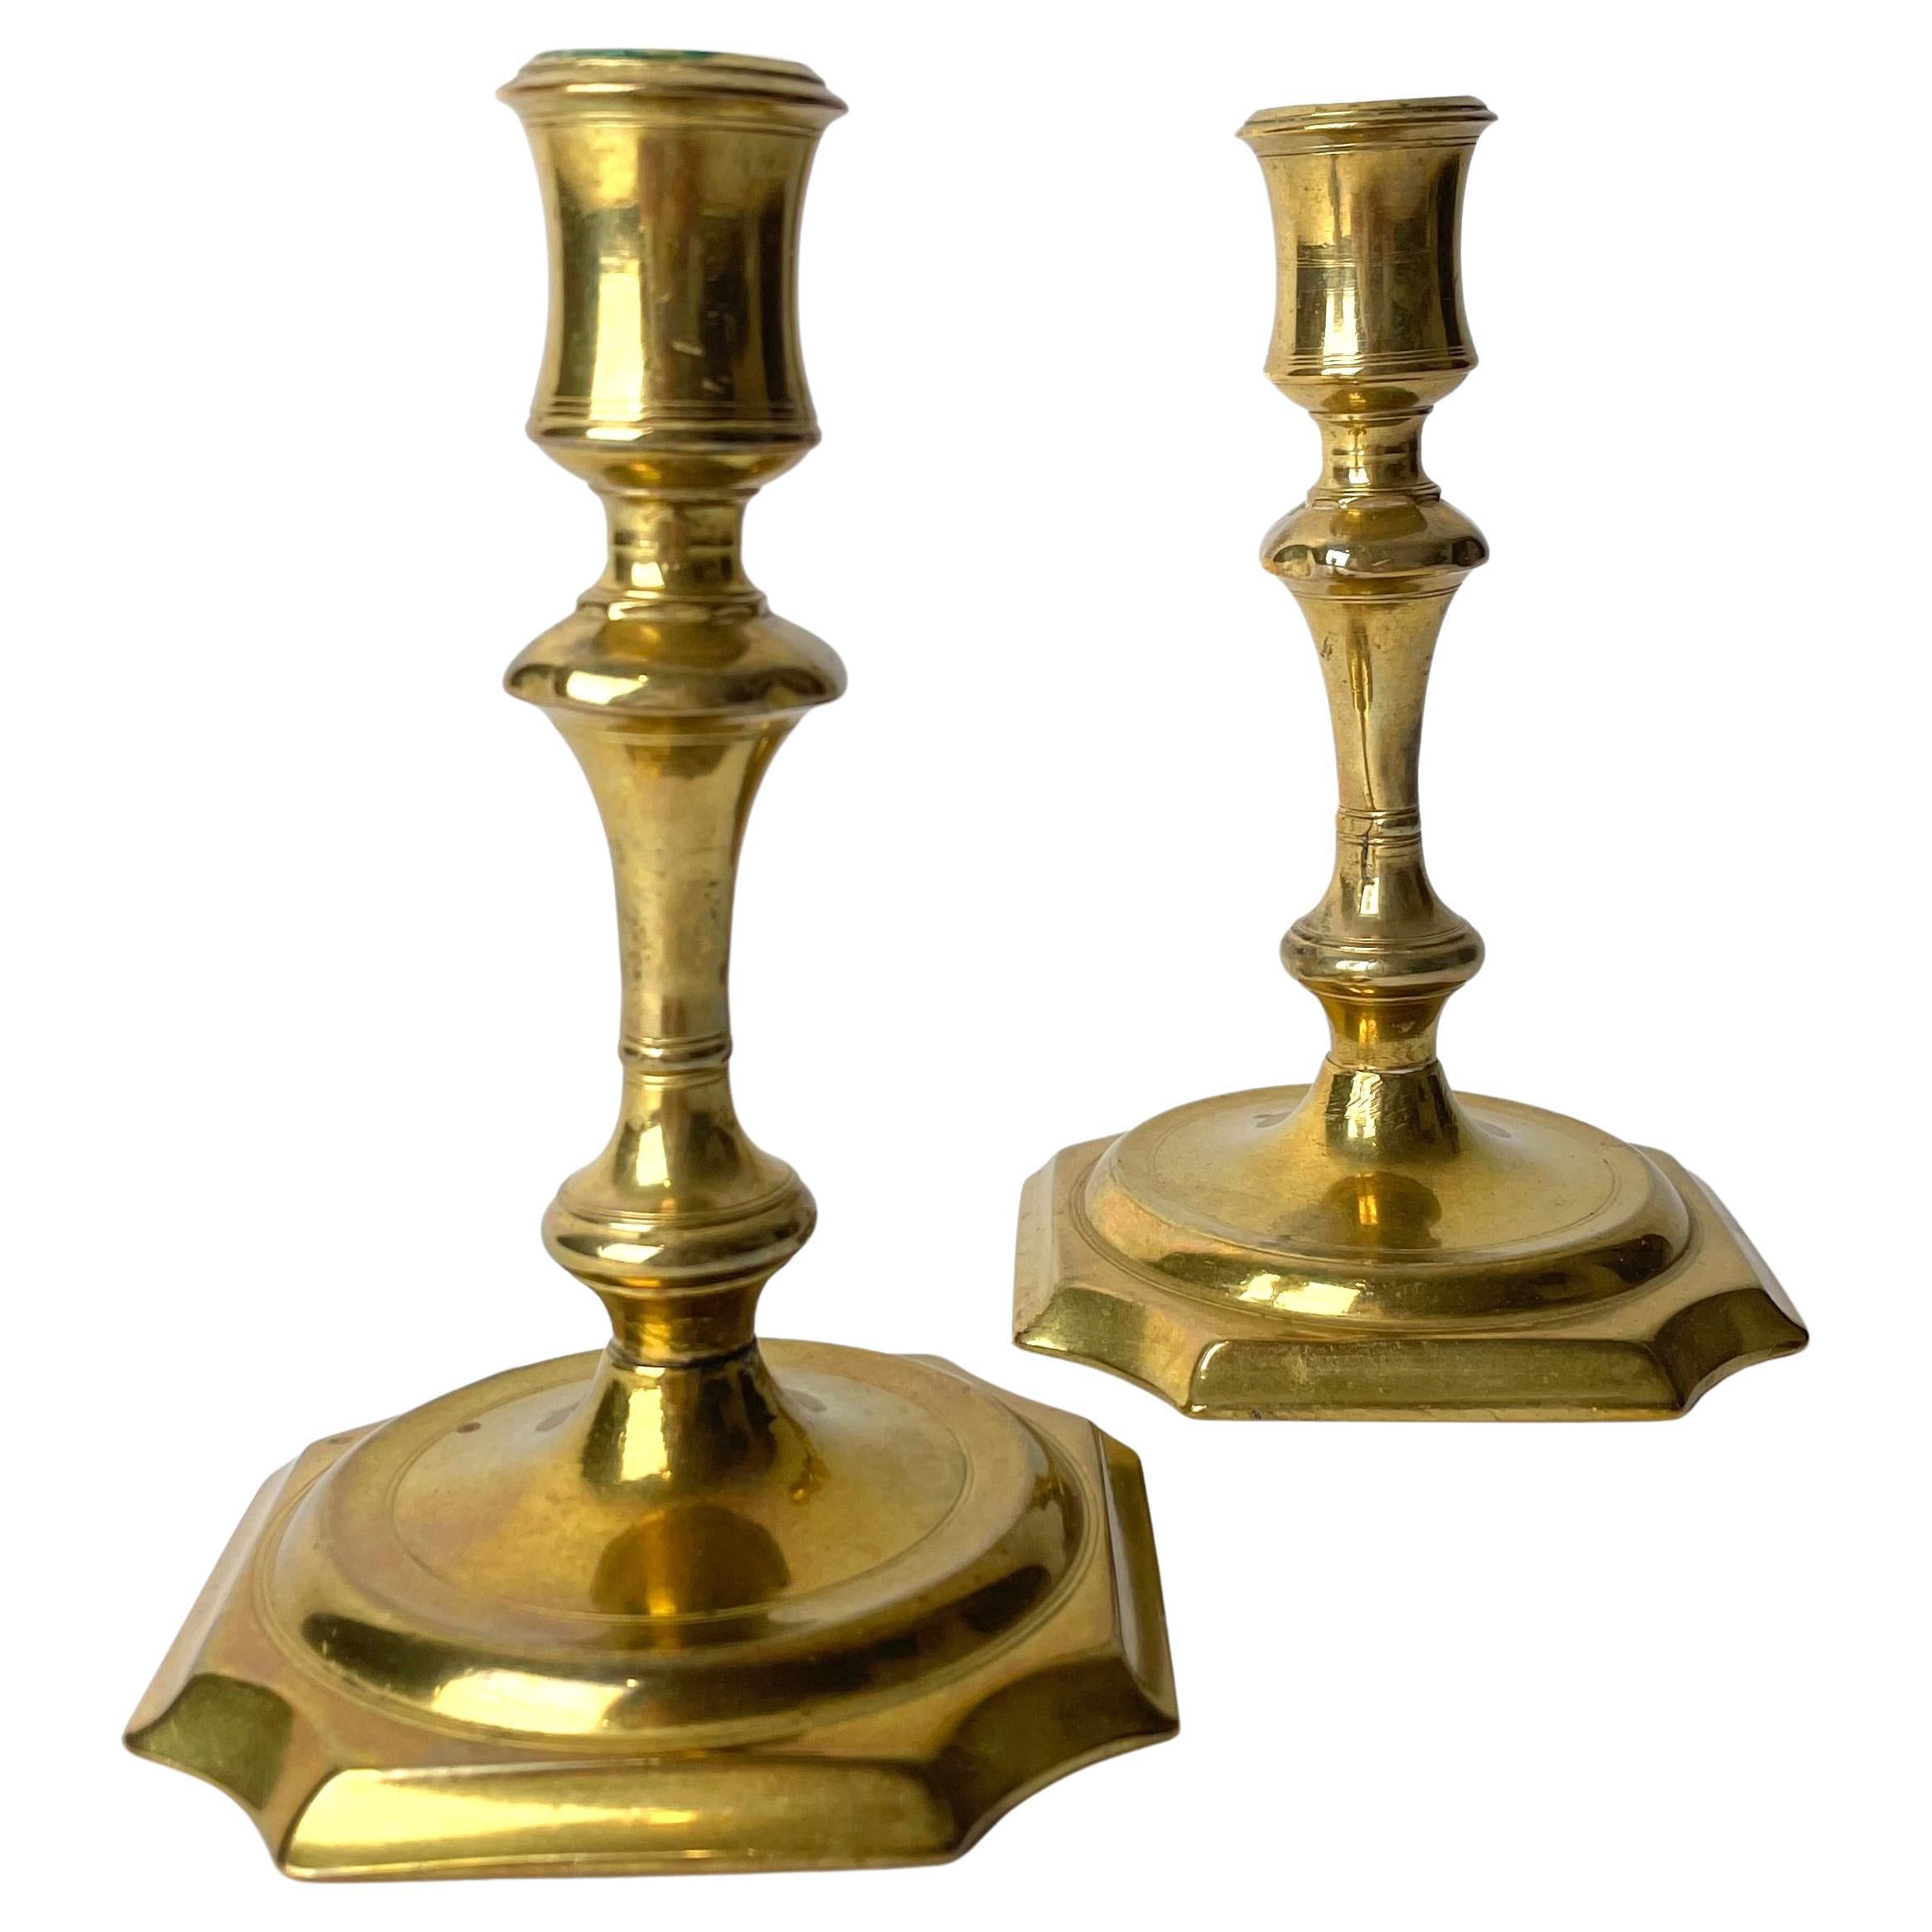 A Pair of 2 Lovely Brass Candlesticks, Late Baroque, Early 18th Century For Sale